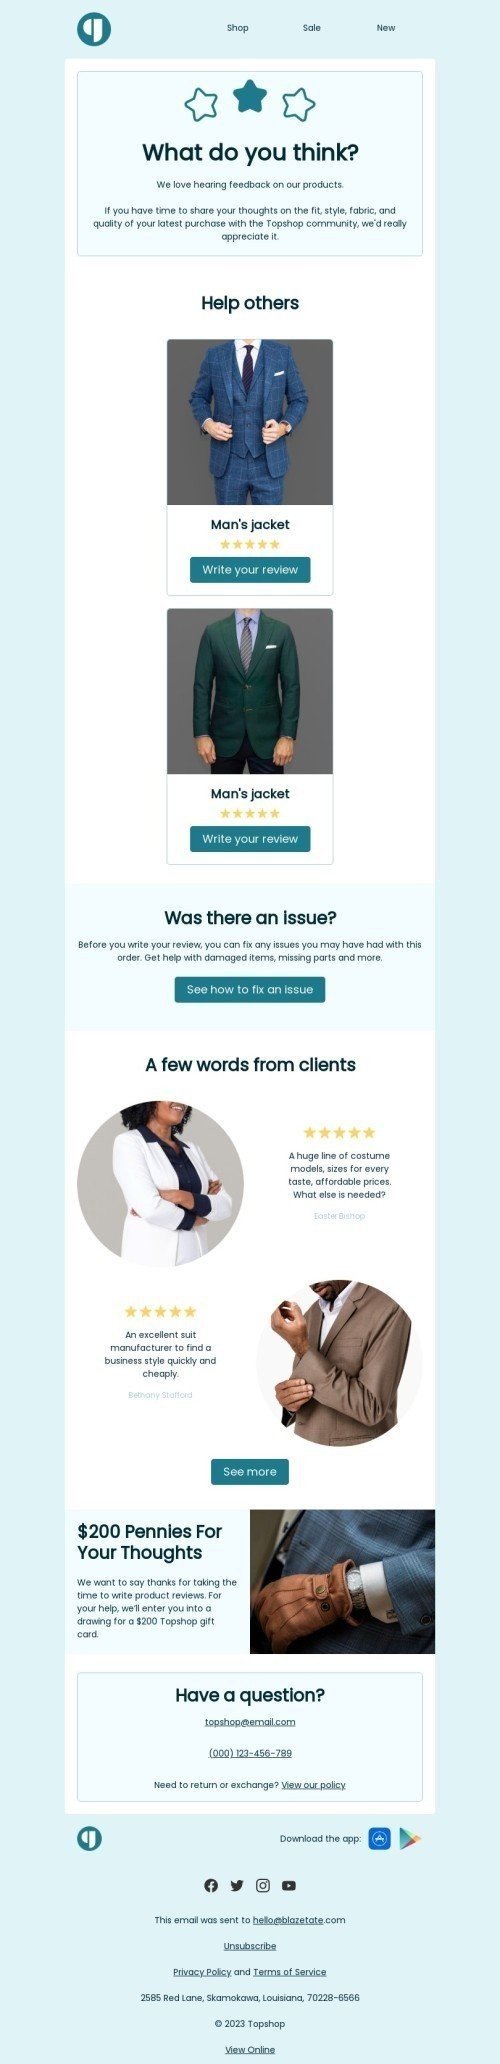 Survey & feedback email template "What do you think?" for ecommerce industry mobile view